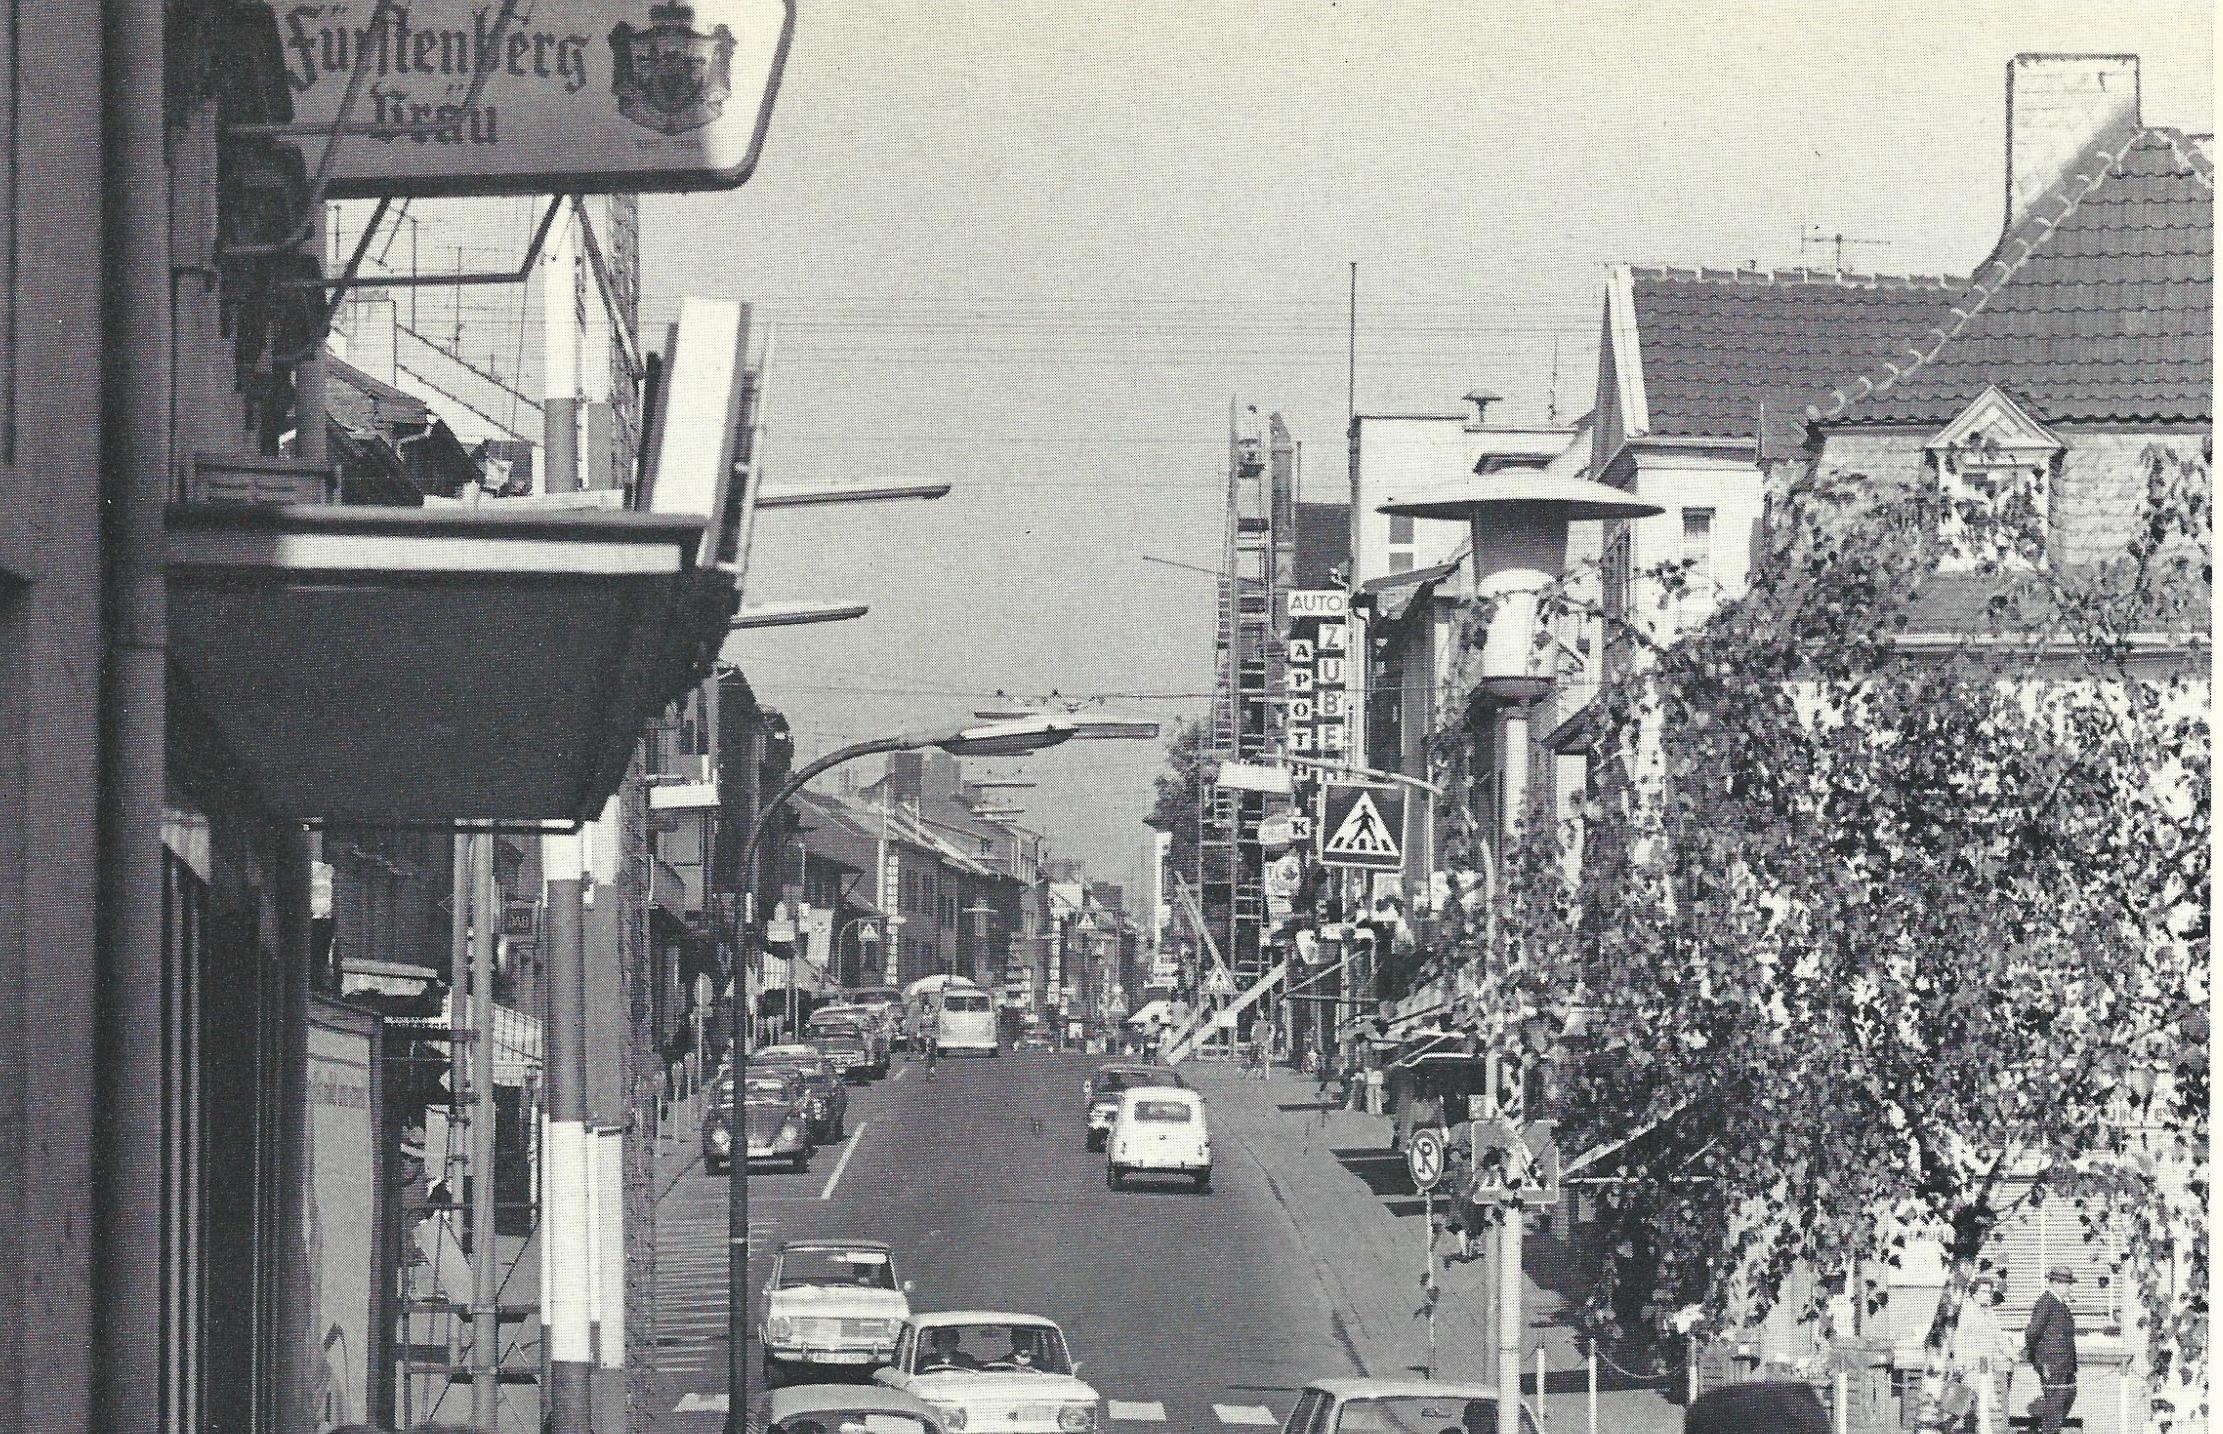 The Kaiserstraße is the main commercial street and important motorway through Würselens (circa 1965)